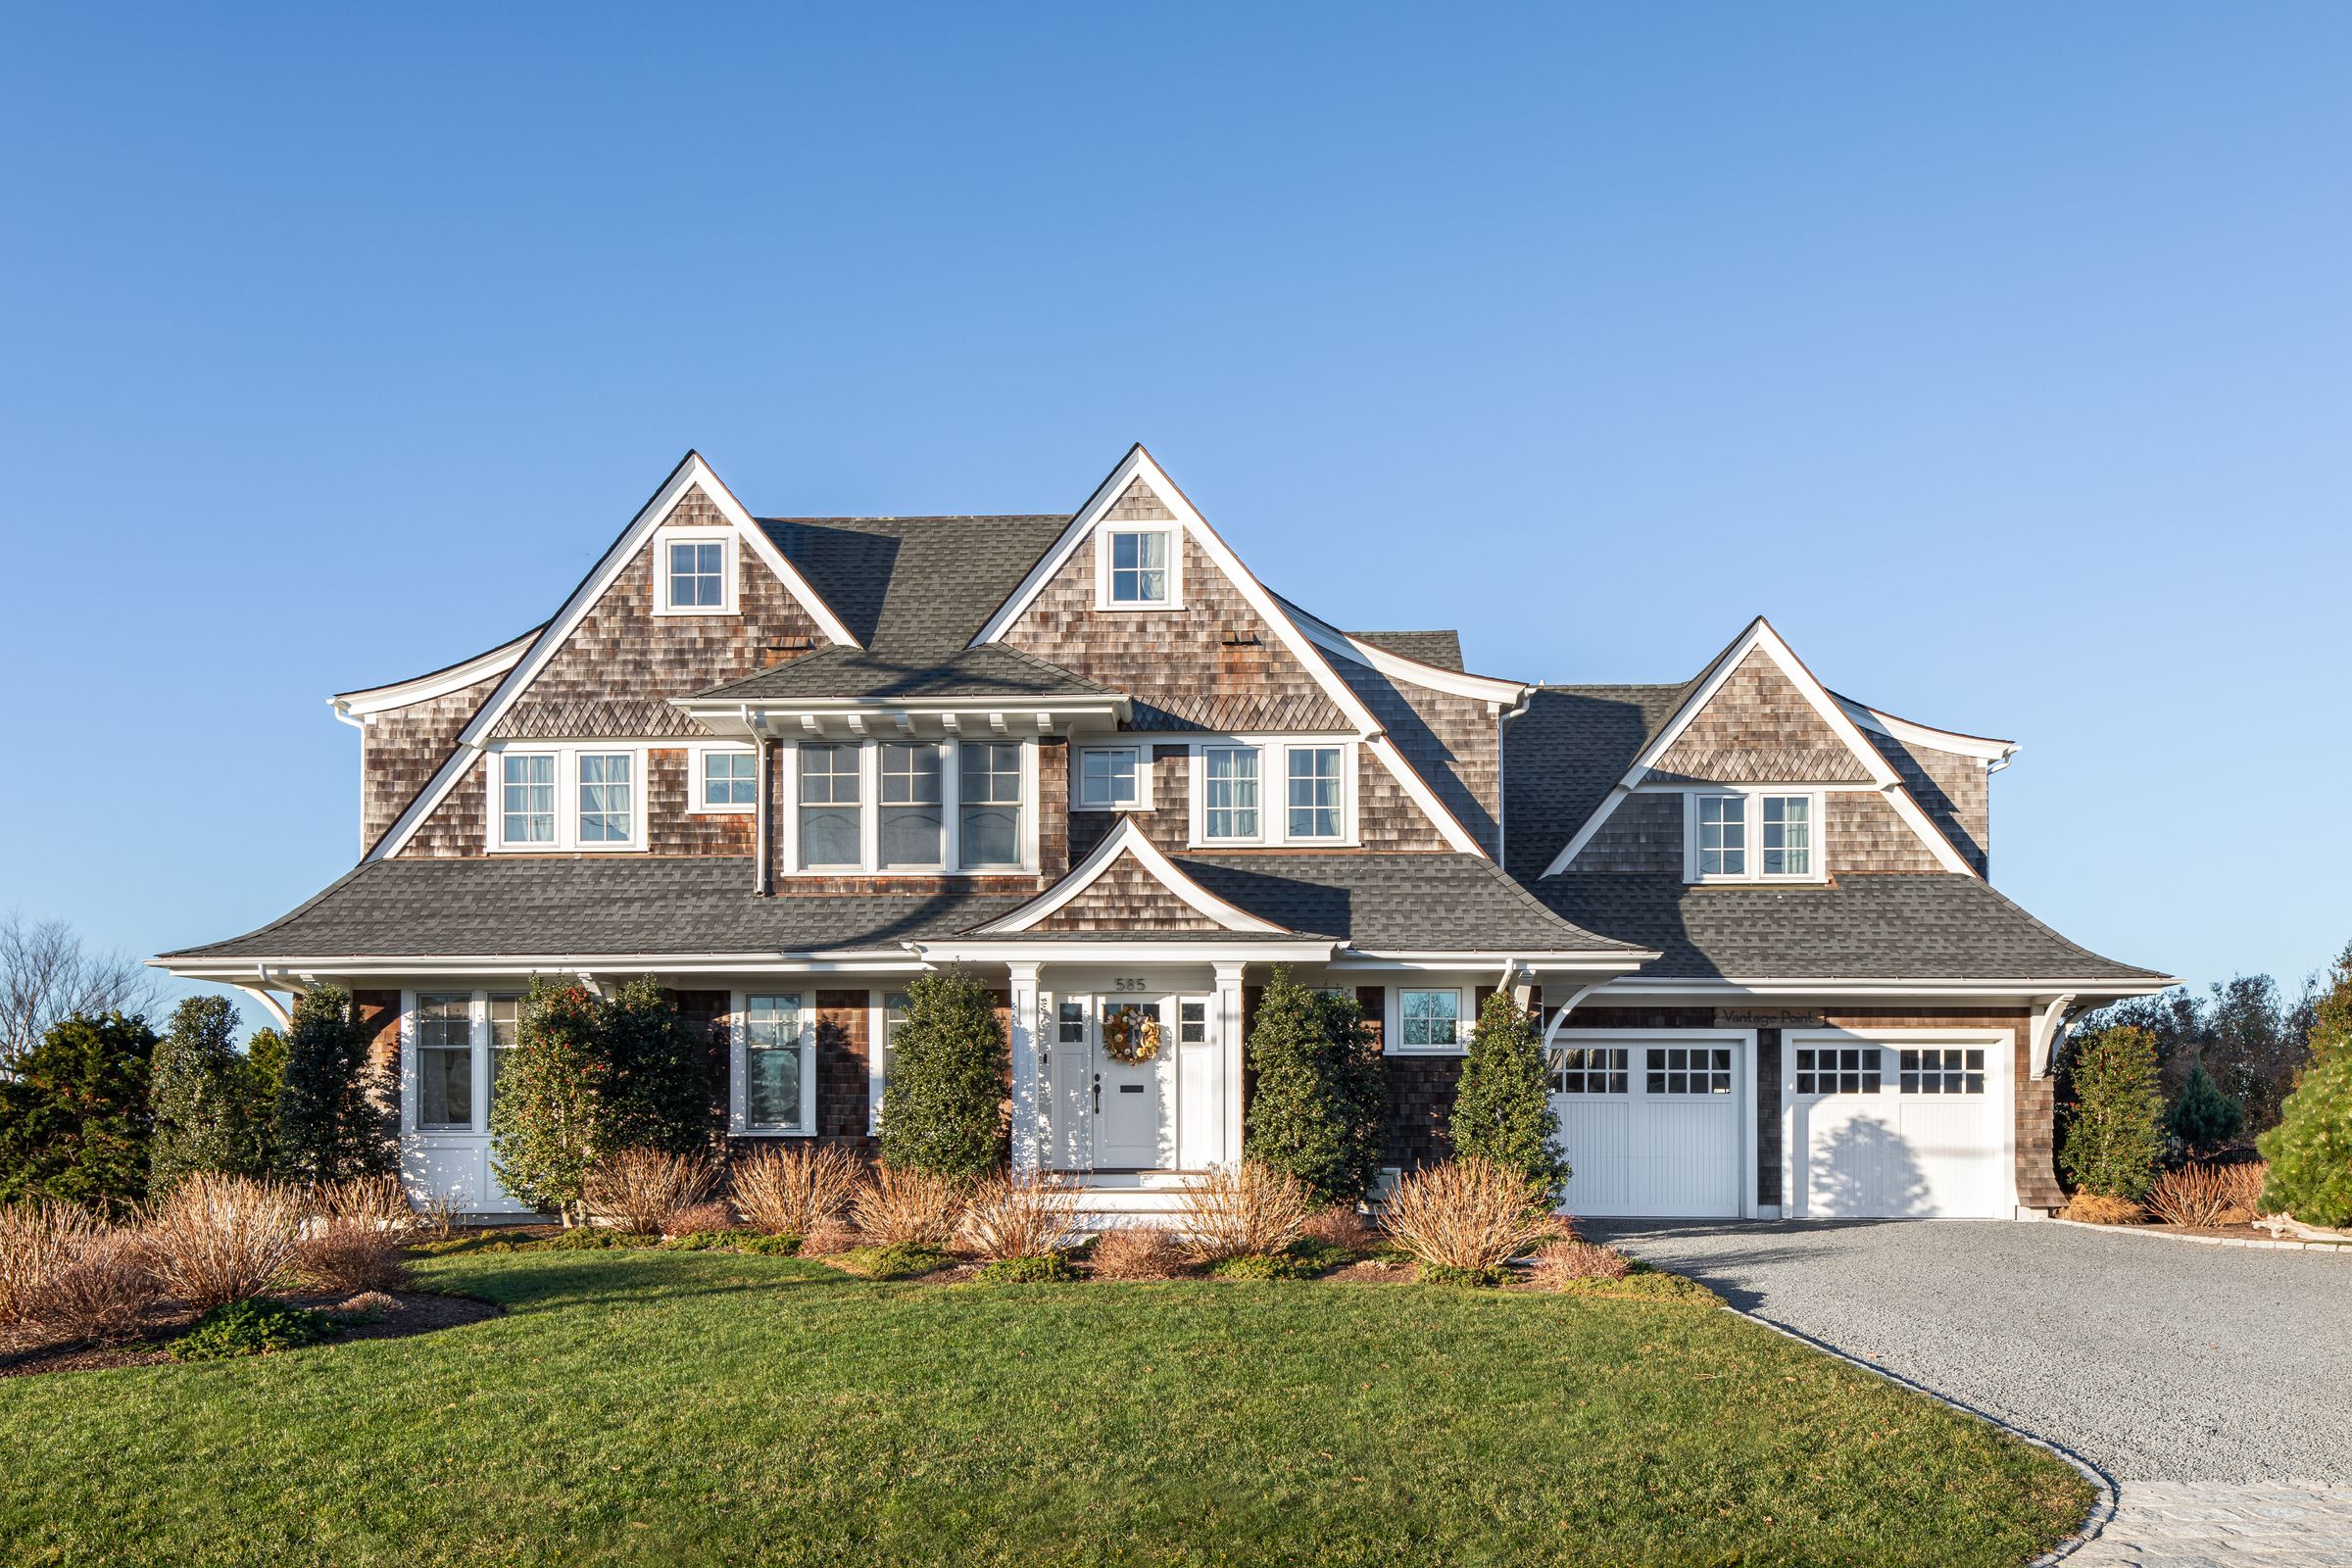 LILA DELMAN COMPASS SELLS EASTON’S POINT HOME FOR $4,350,000